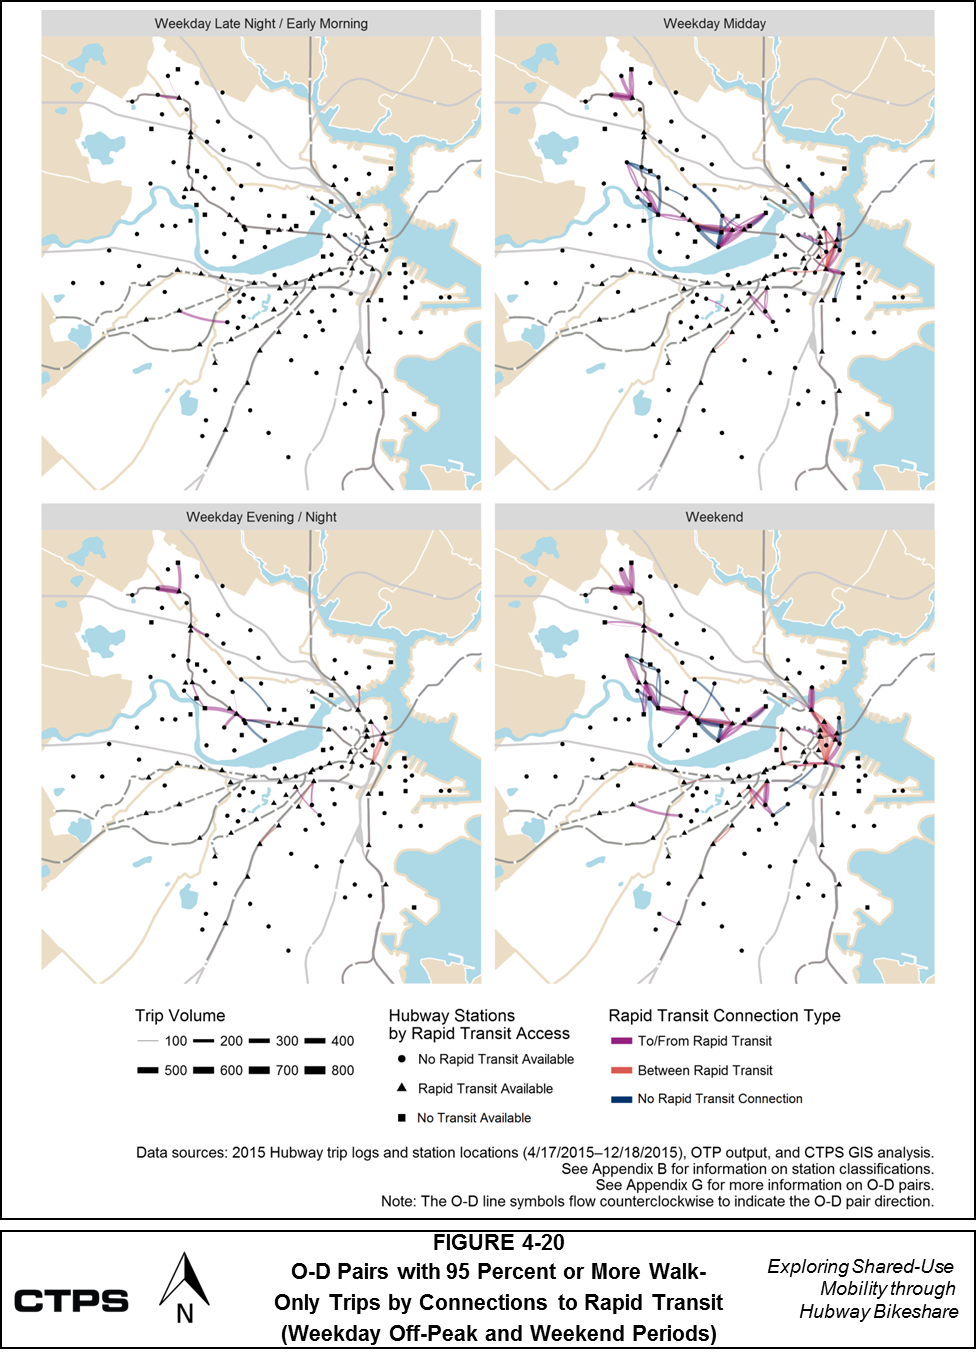 FIGURE 4-20: O-D Pairs with 95 Percent or More Walk-Only Trips by Connections to Rapid Transit (Weekday Off-Peak and Weekend Periods):  This series of four maps shows origin-destination (O-D) pairs of Hubway member trips. The first shows O-D pairs during the weekday late night/early morning period, the second shows O-D pairs during the weekday midday period, the third shows O-D pairs during the weekday evening/night period, and the fourth shows O-D pairs during weekend days. These O-D pairs are classified according to their trip volume and the number of trip ends that were near transit, particularly rapid transit. At least 95 percent of the trips in these pairs had “walk-only” travel itineraries generated by Open Trip Planner (OTP). More information about these O-D pairs is available in Appendix G. The maps also classify Hubway stations by whether or not transit, particularly rapid transit, is accessible within 200 meters.